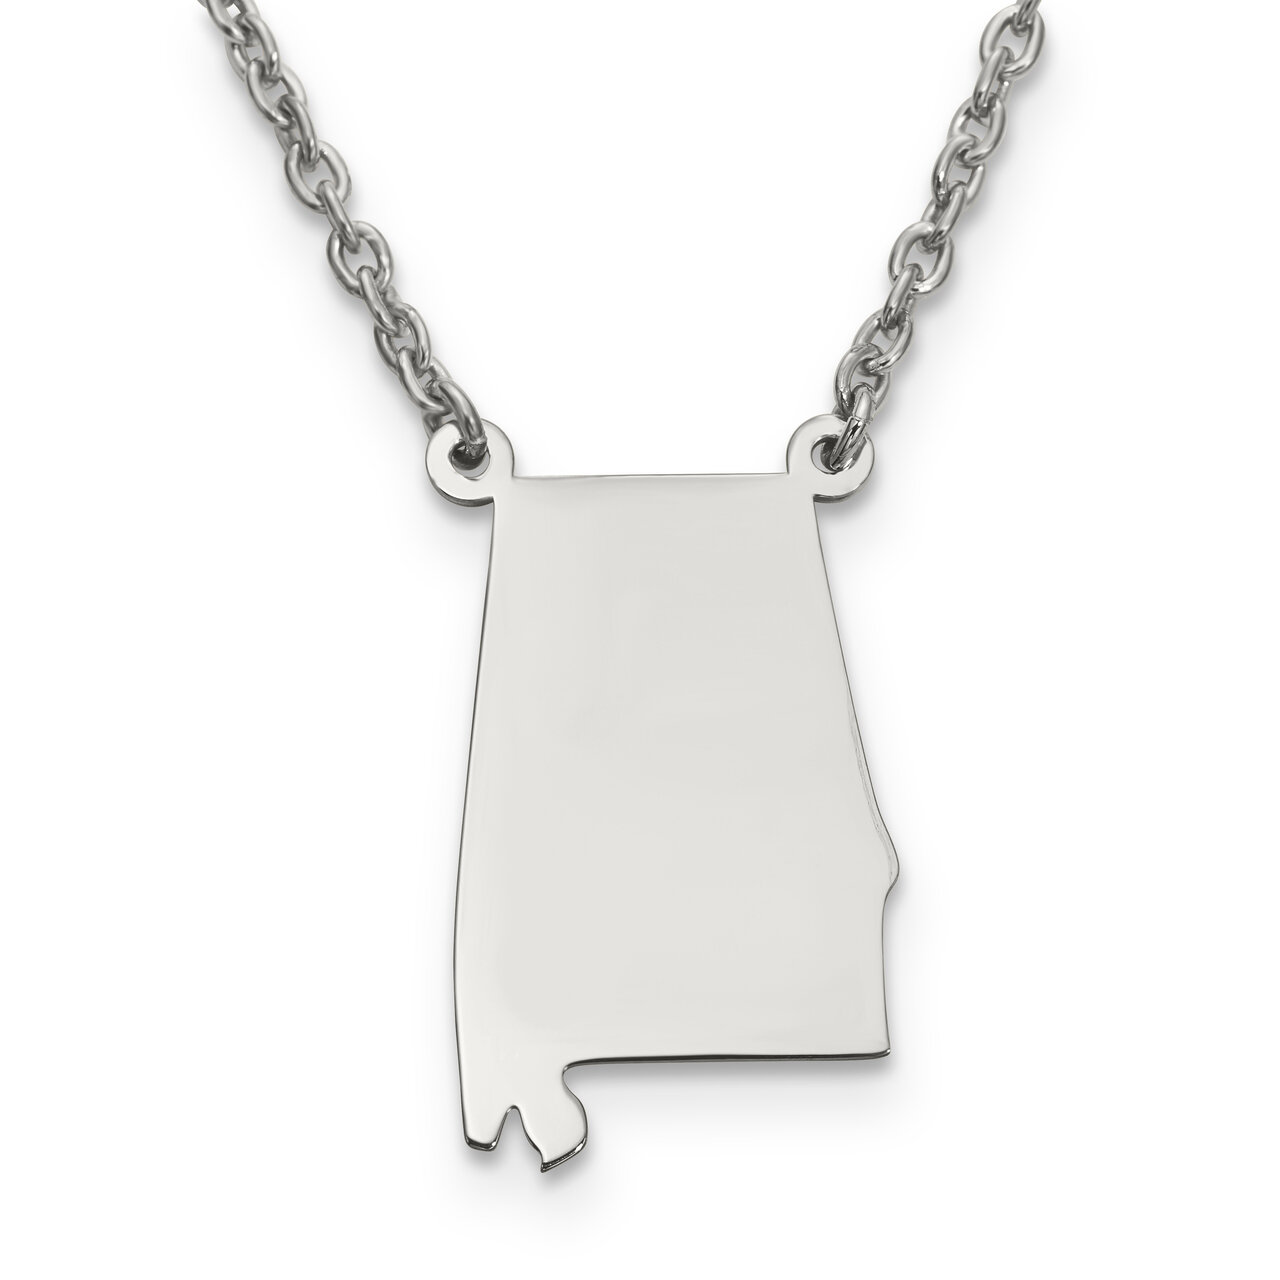 Alabama State Pendant Necklace with Chain Sterling Silver Engravable XNA706SS-AL